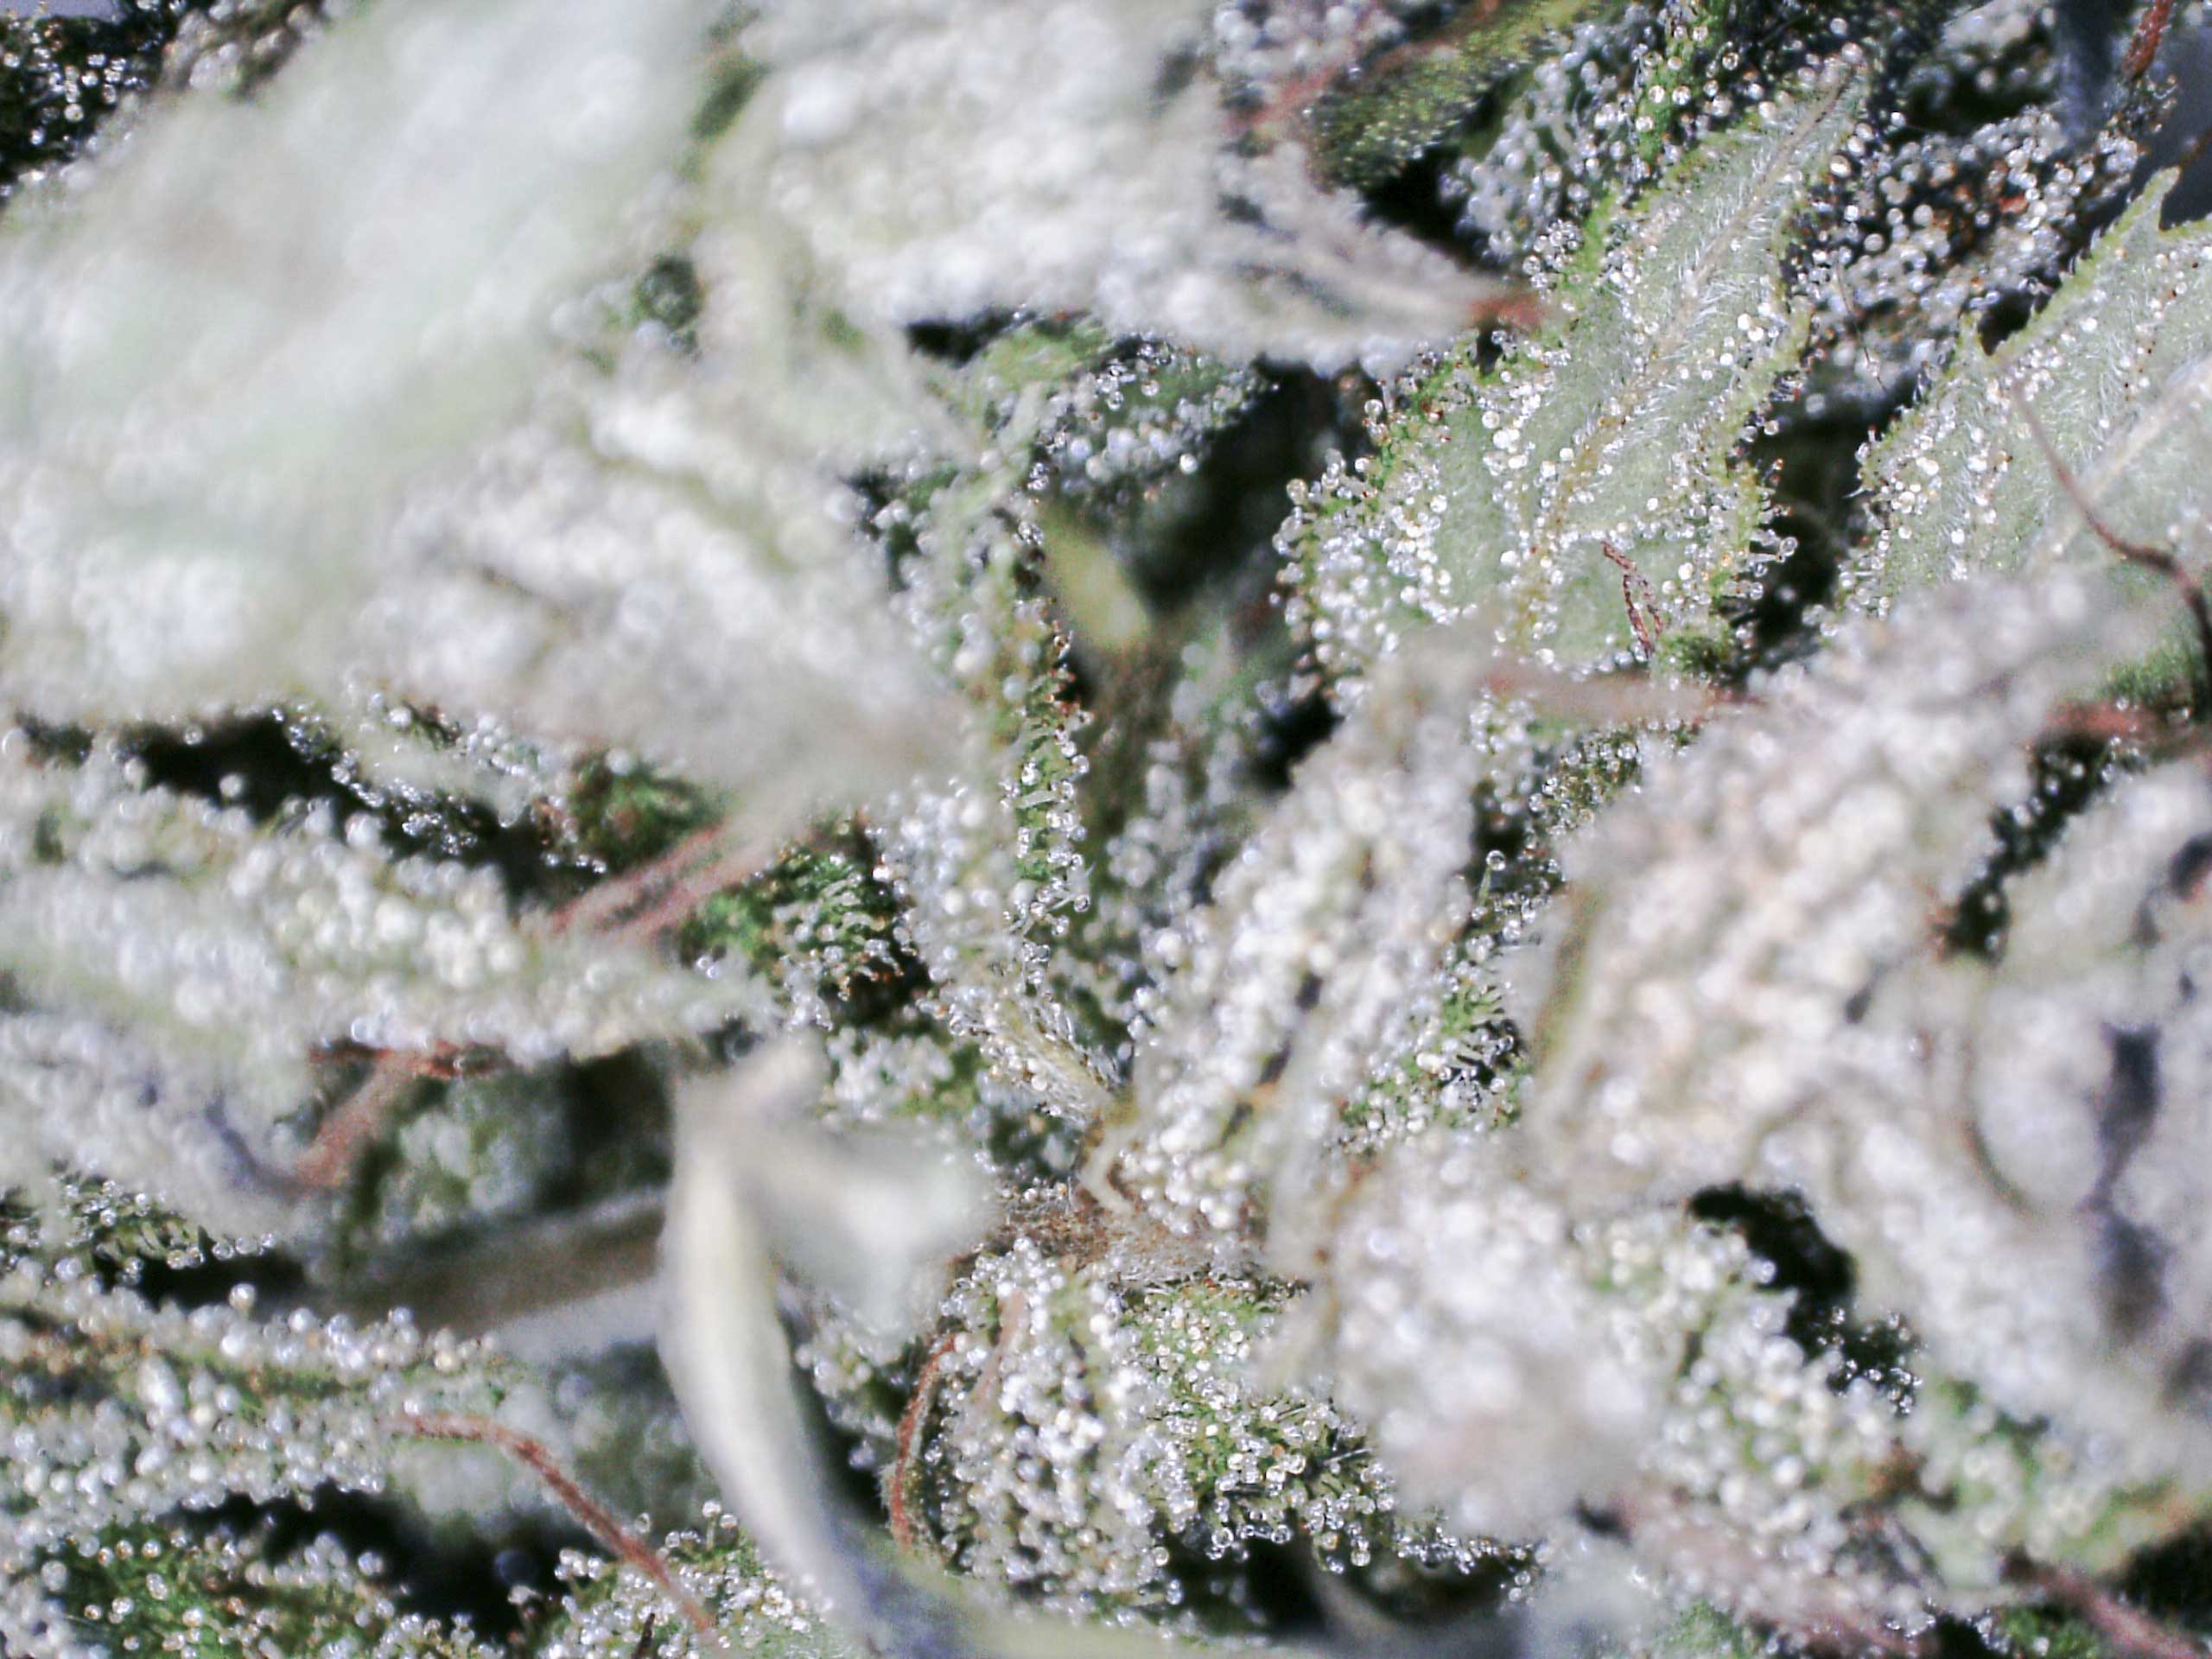 flowers with trichomes